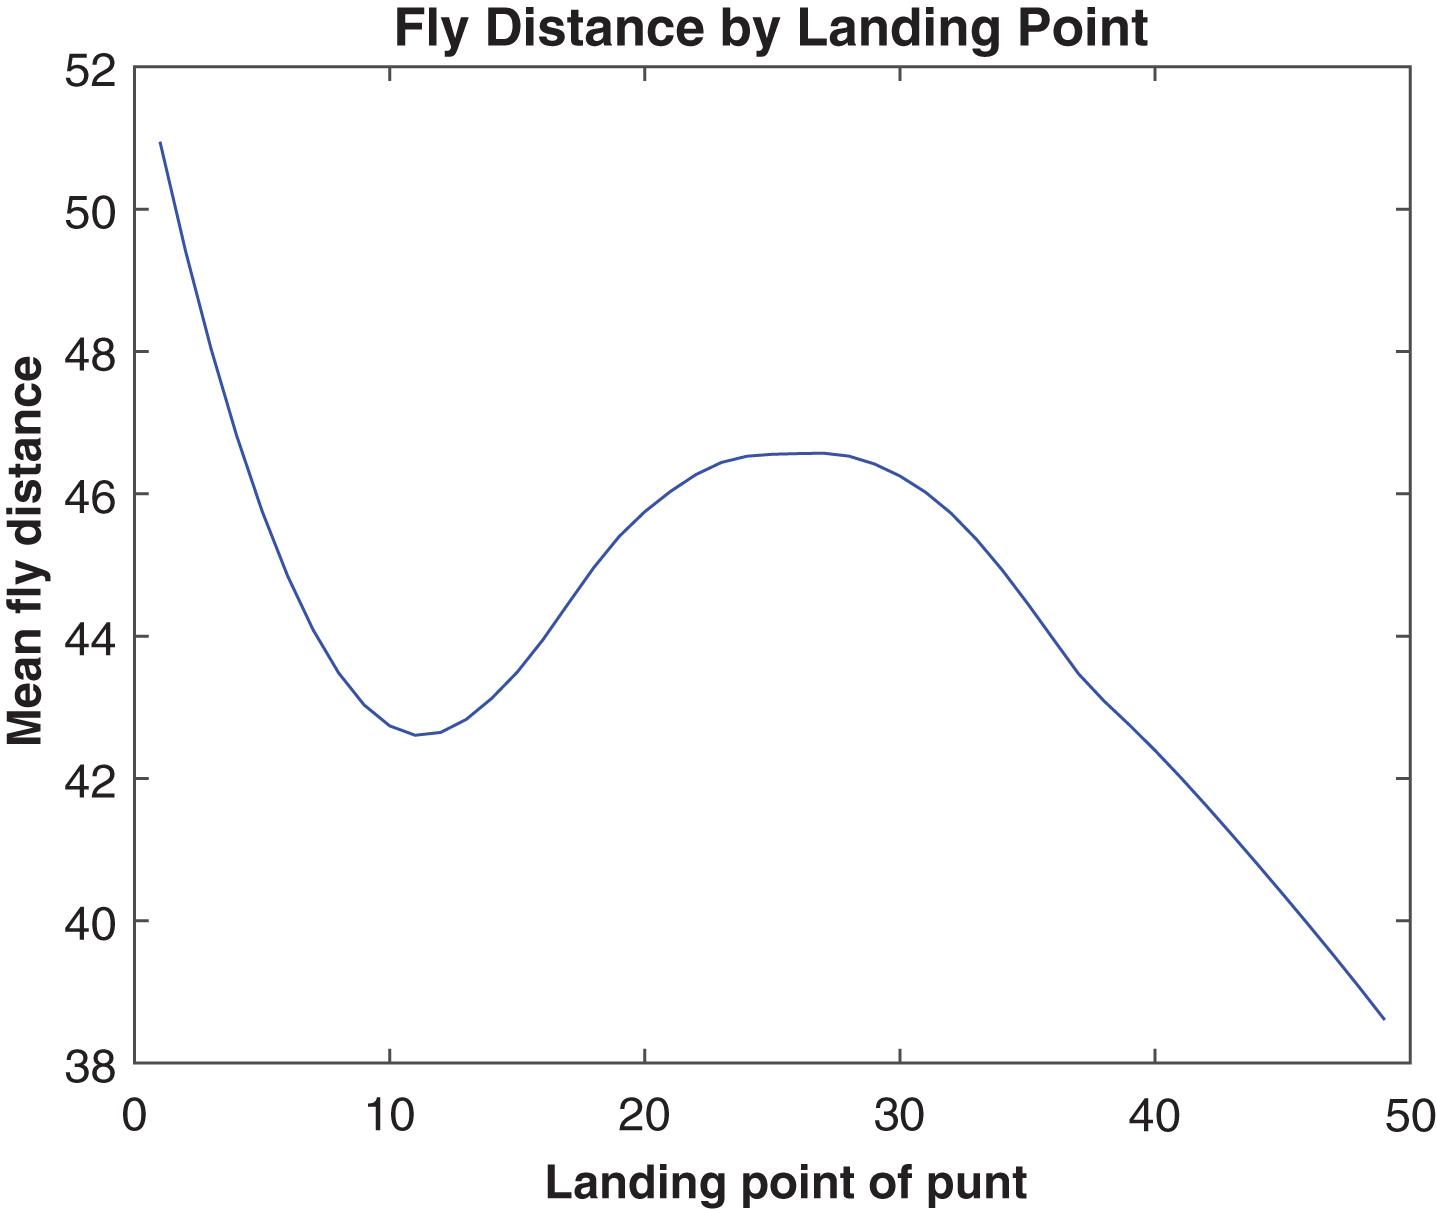 Average fly distance by landing point, 2013.